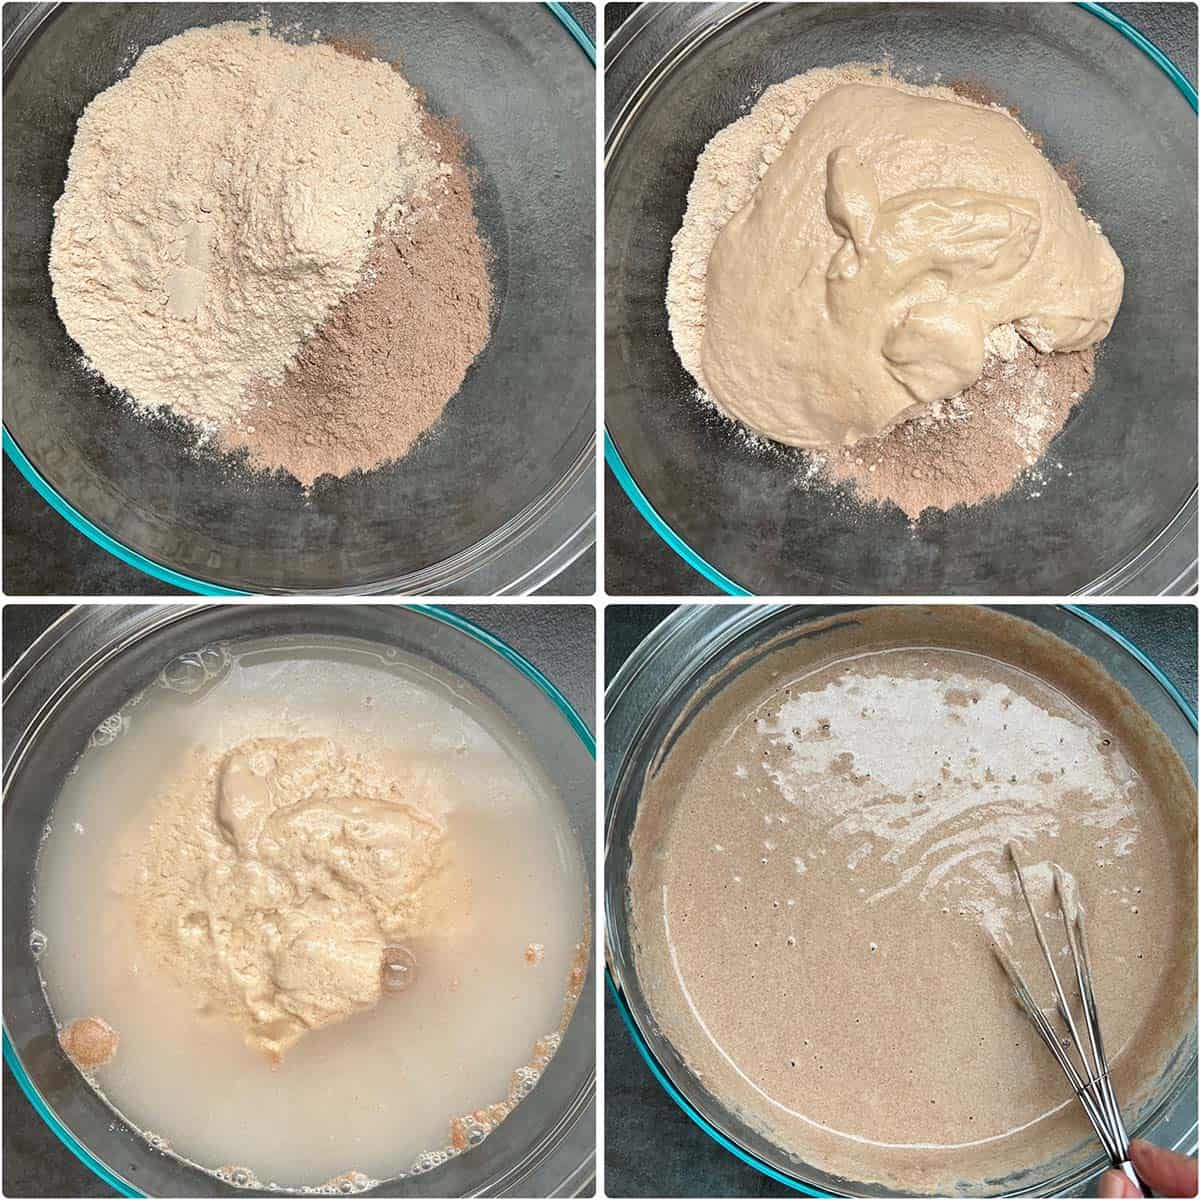 4 panel photo showing the mixing of ingredients in a bowl for the batter.